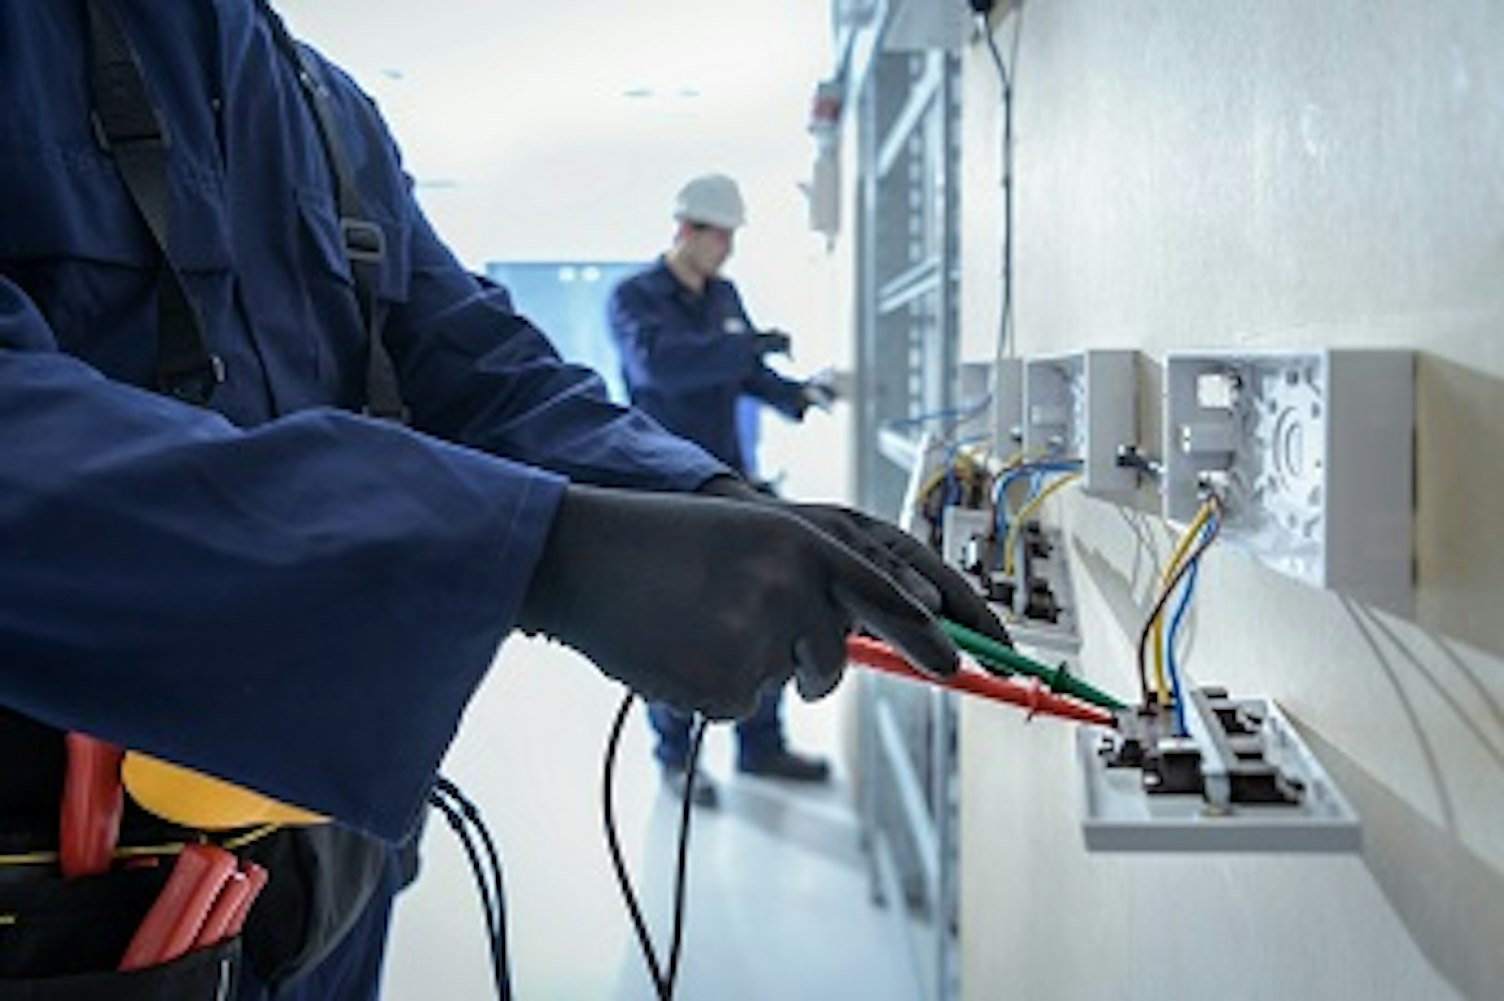 Electrical engineers testing electrical equipment 344px